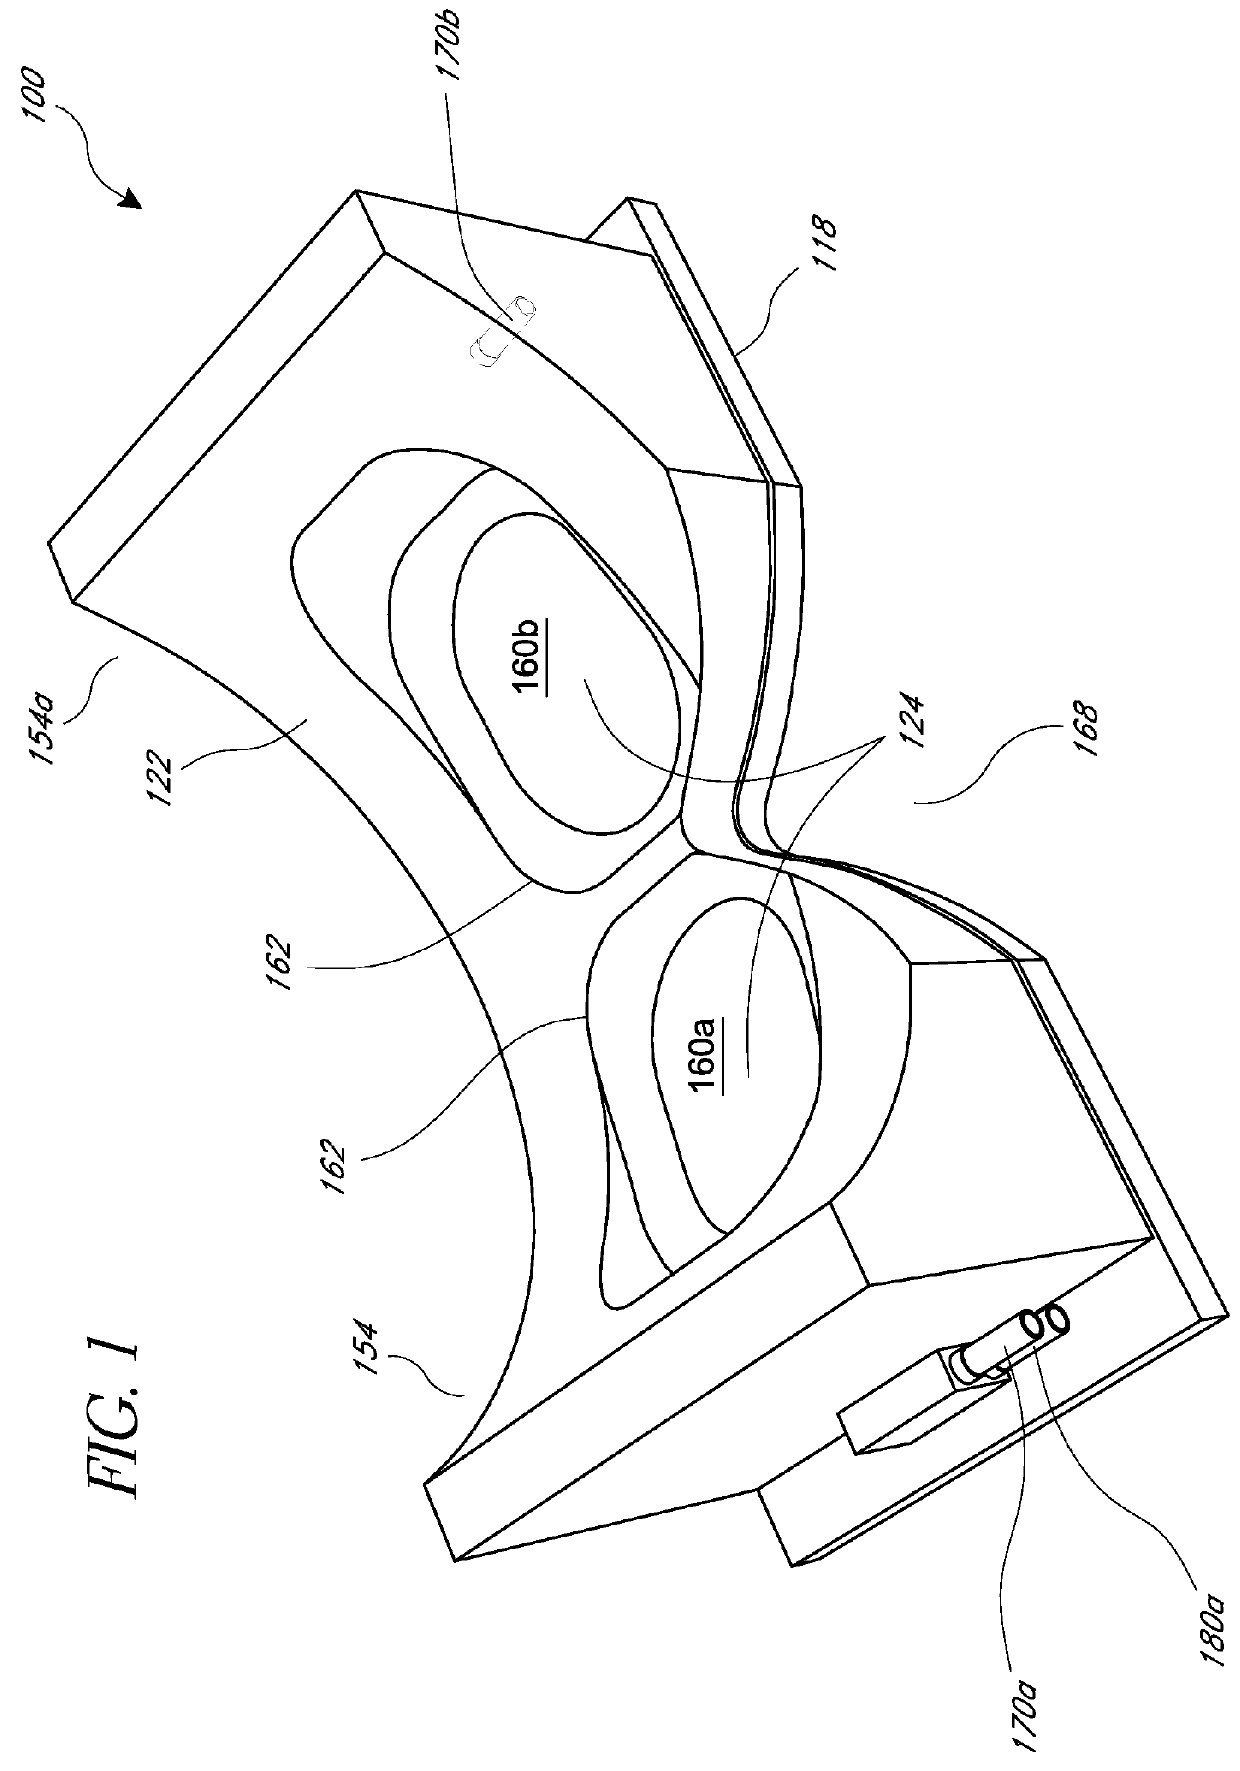 Inflatable medical interfaces and other medical devices, systems, and methods